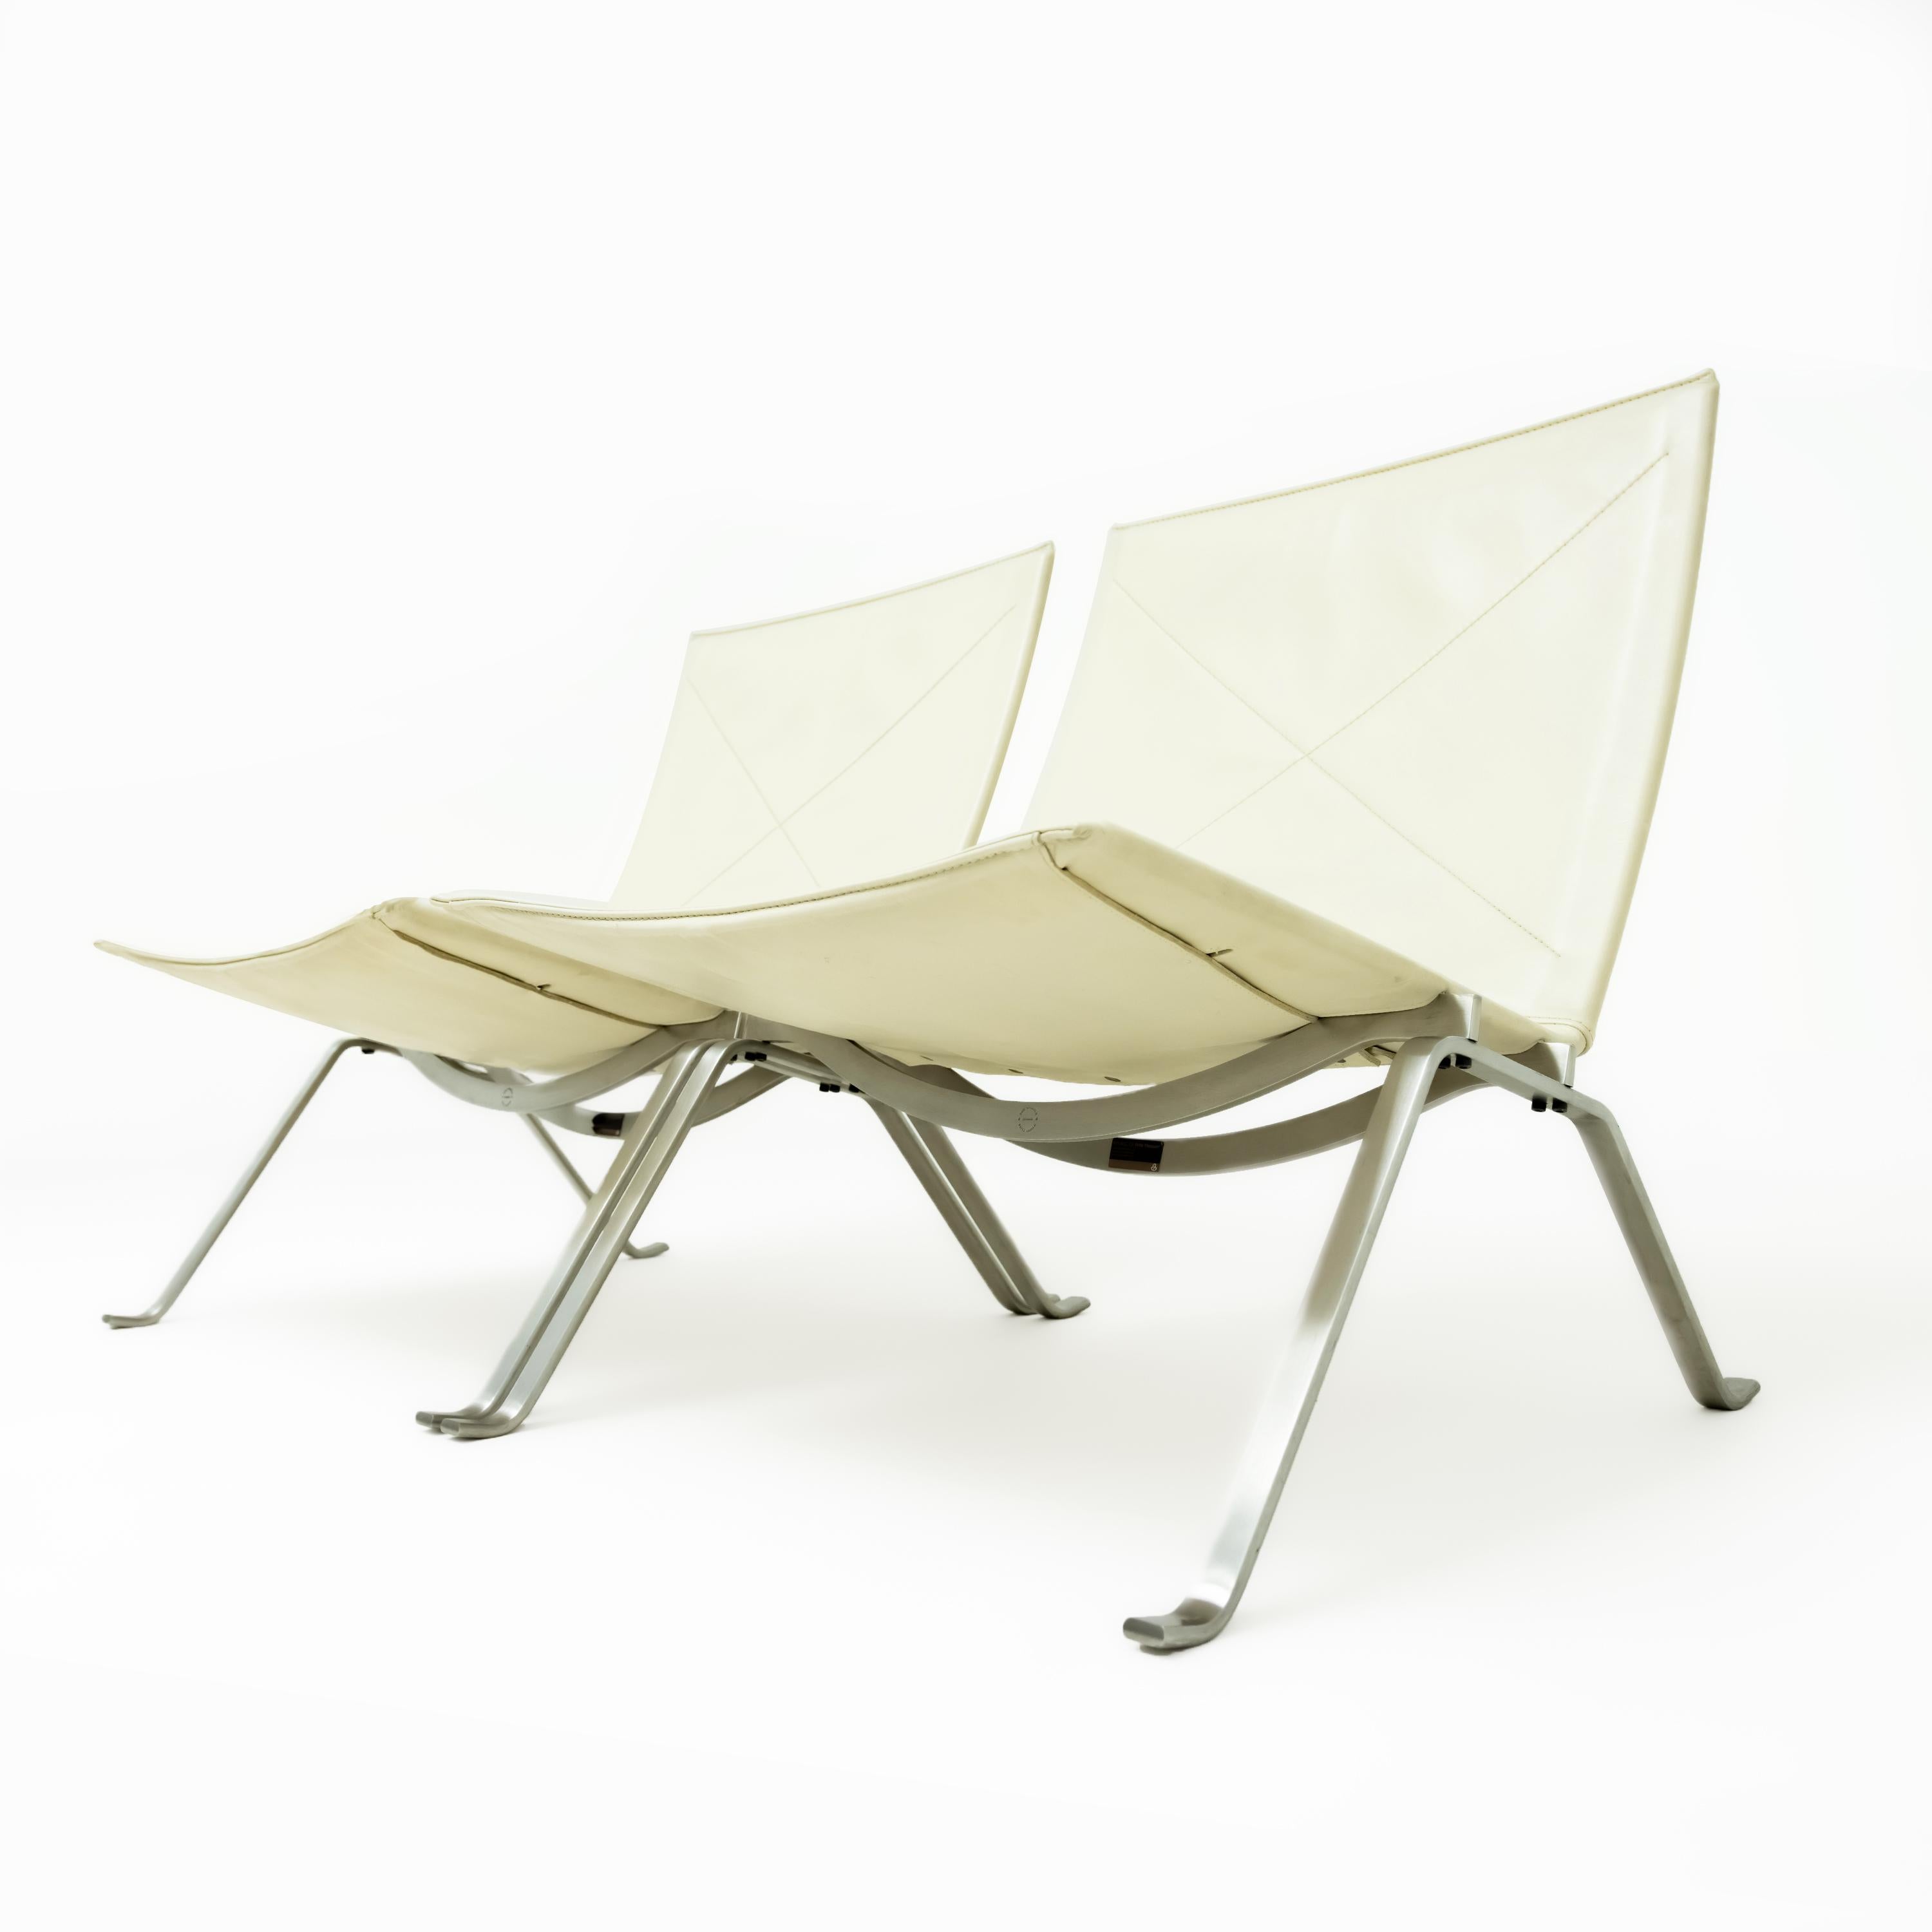 Poul Kjaerholm PK22 Lounge Chair in Cream Leather for Fritz Hansen '2 Available' 3